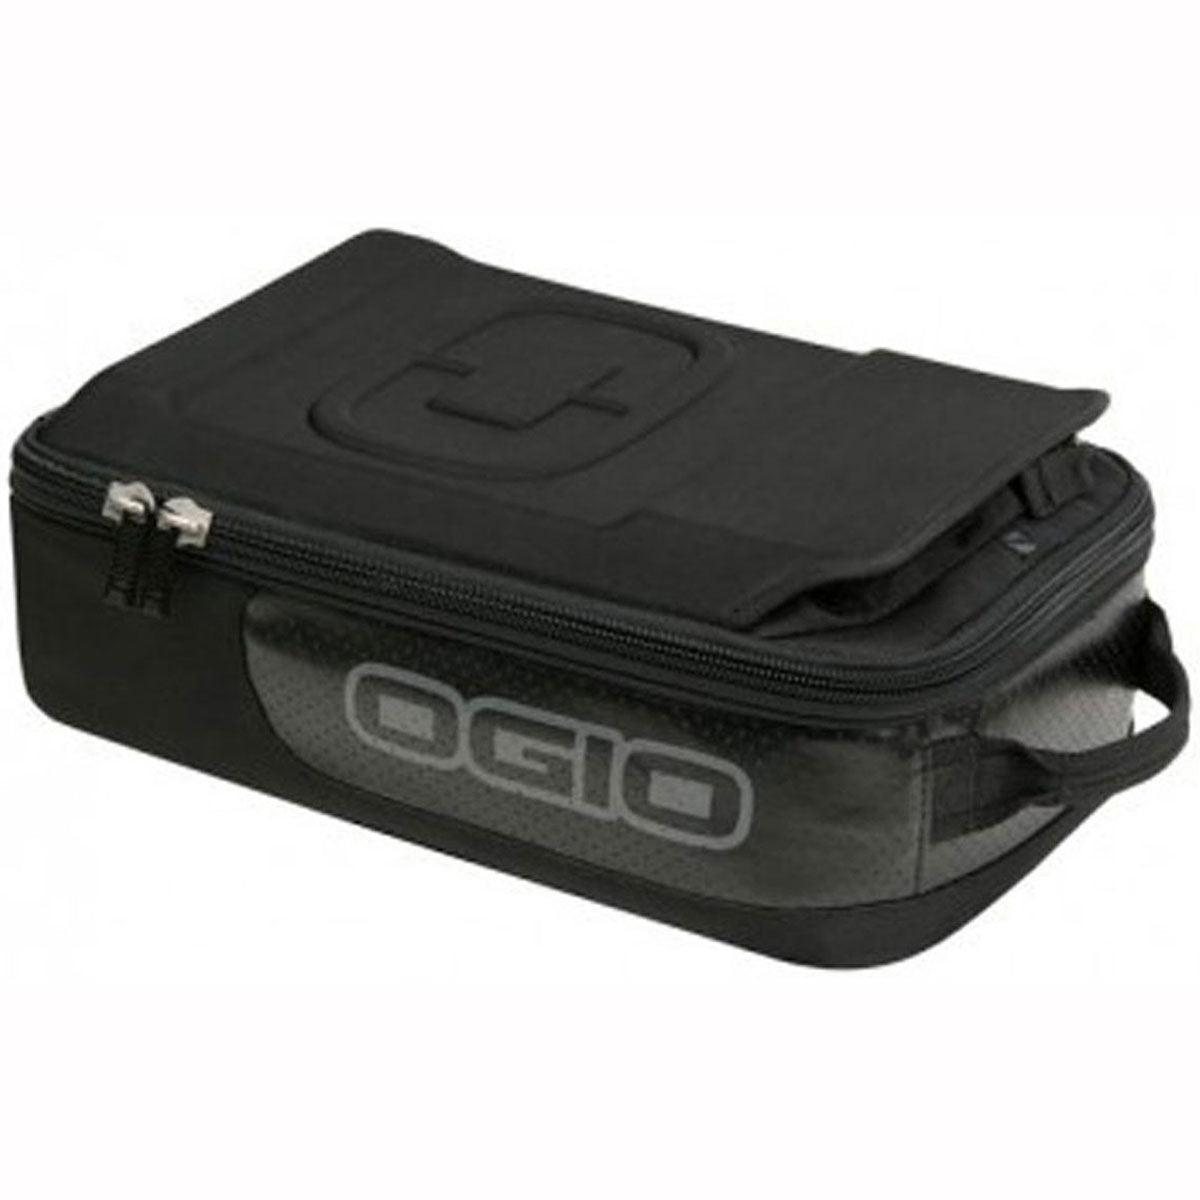 Ogio Goggle Carry Box 'Stealth' - Black - The Motocrosshut